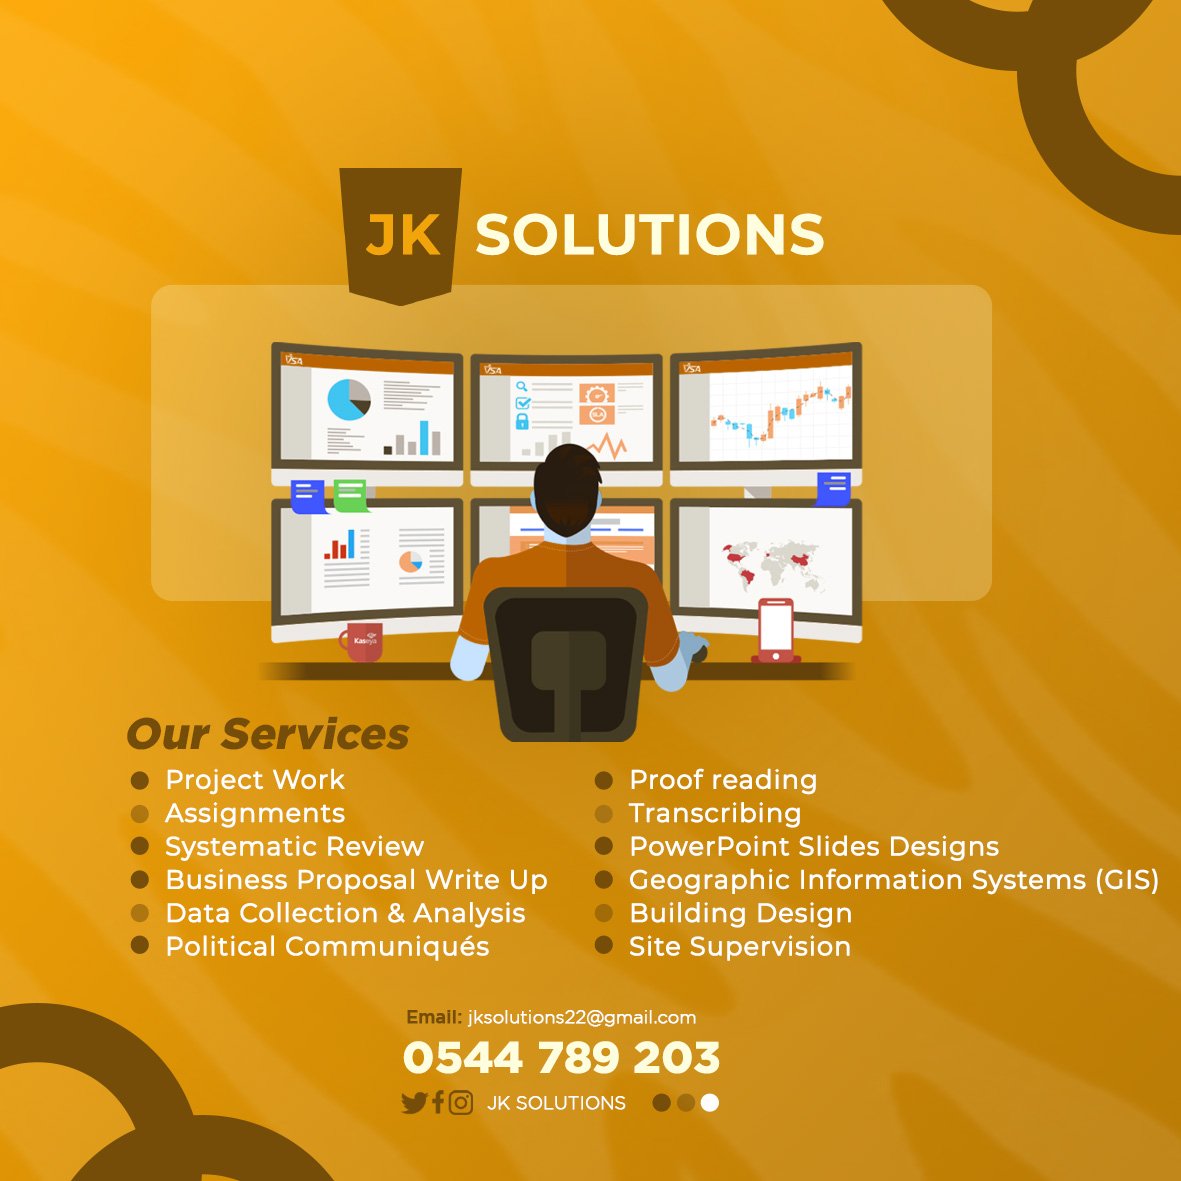 Hello👋
Finally we're here to solve all your #Research needs, #Projects #BusinessProposals #Datacollection and #analysis, #GIS, and many more. 
Kindly hit us up anytime for the coolest deals. 
Please retweet this to help us reach our customers 🤗